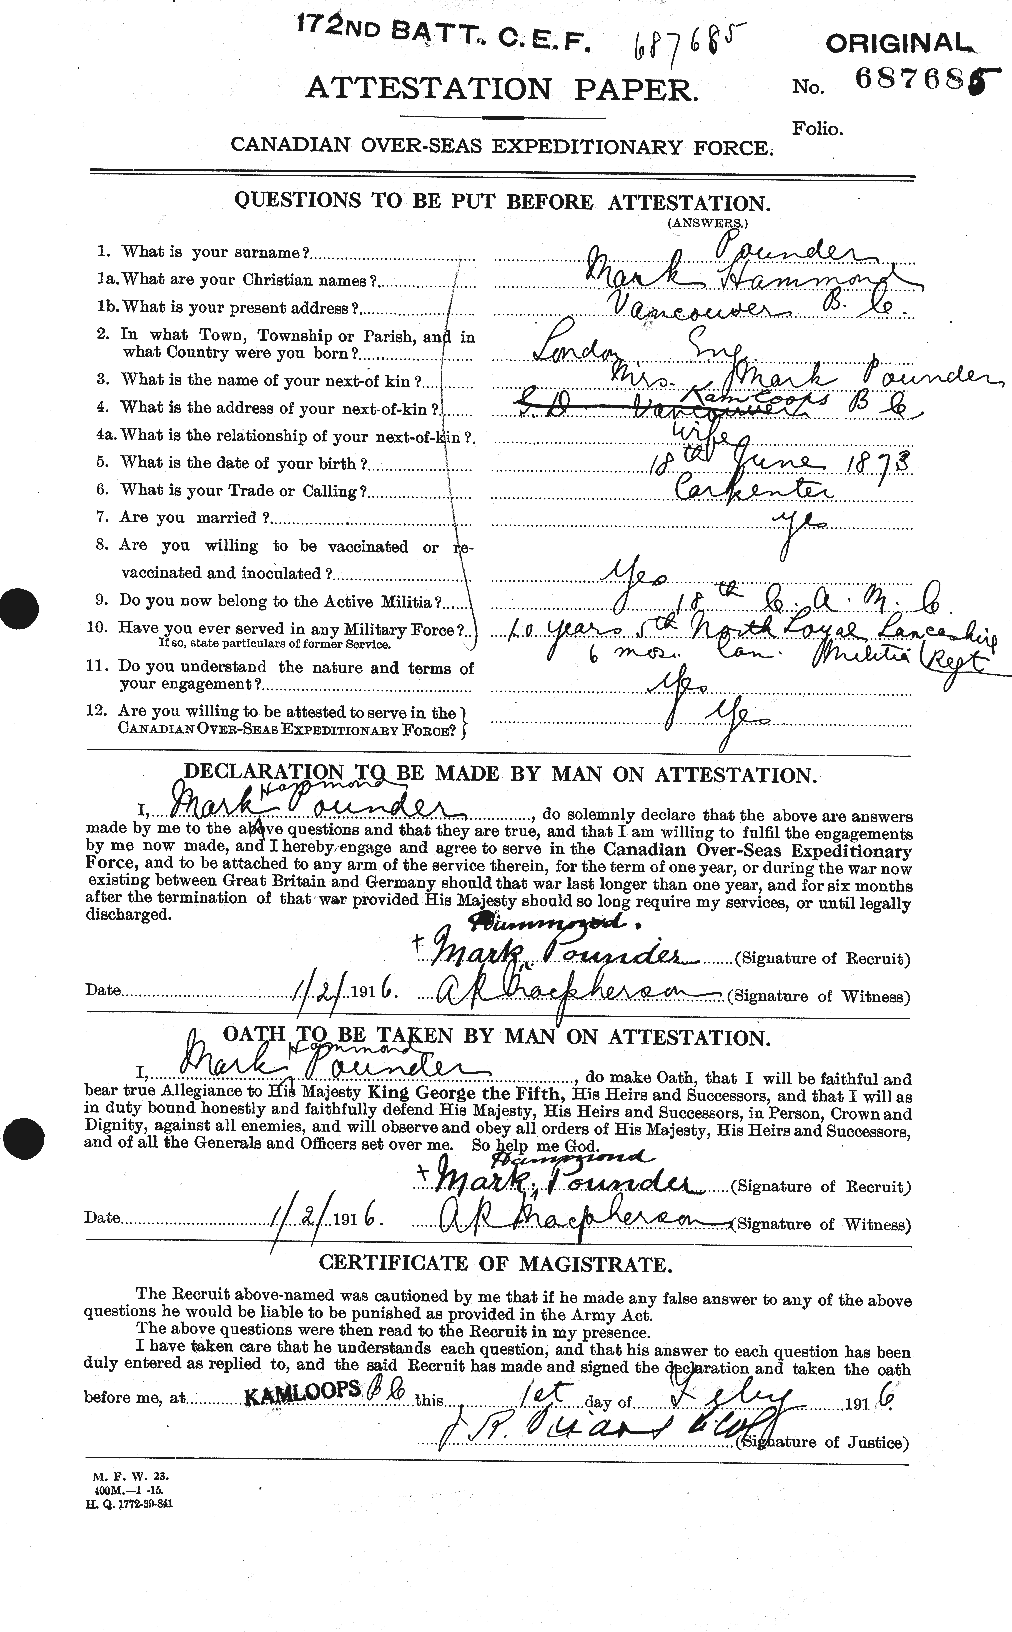 Personnel Records of the First World War - CEF 584988a